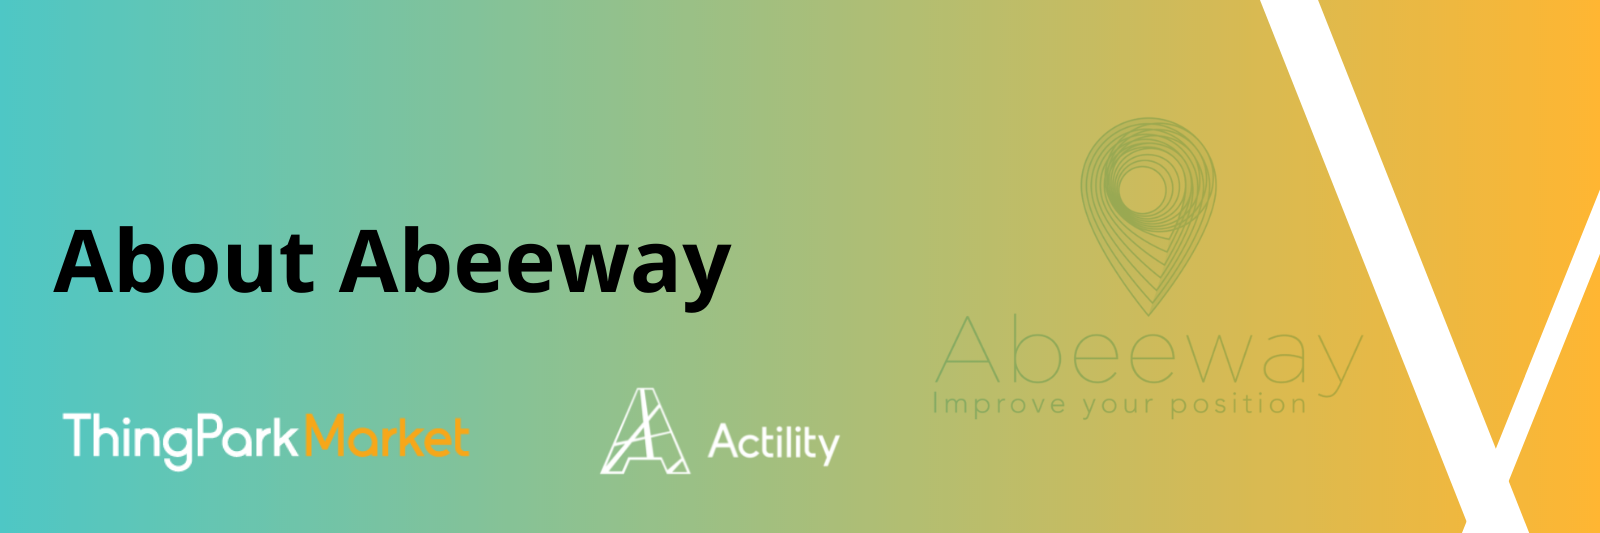 About Abeeway